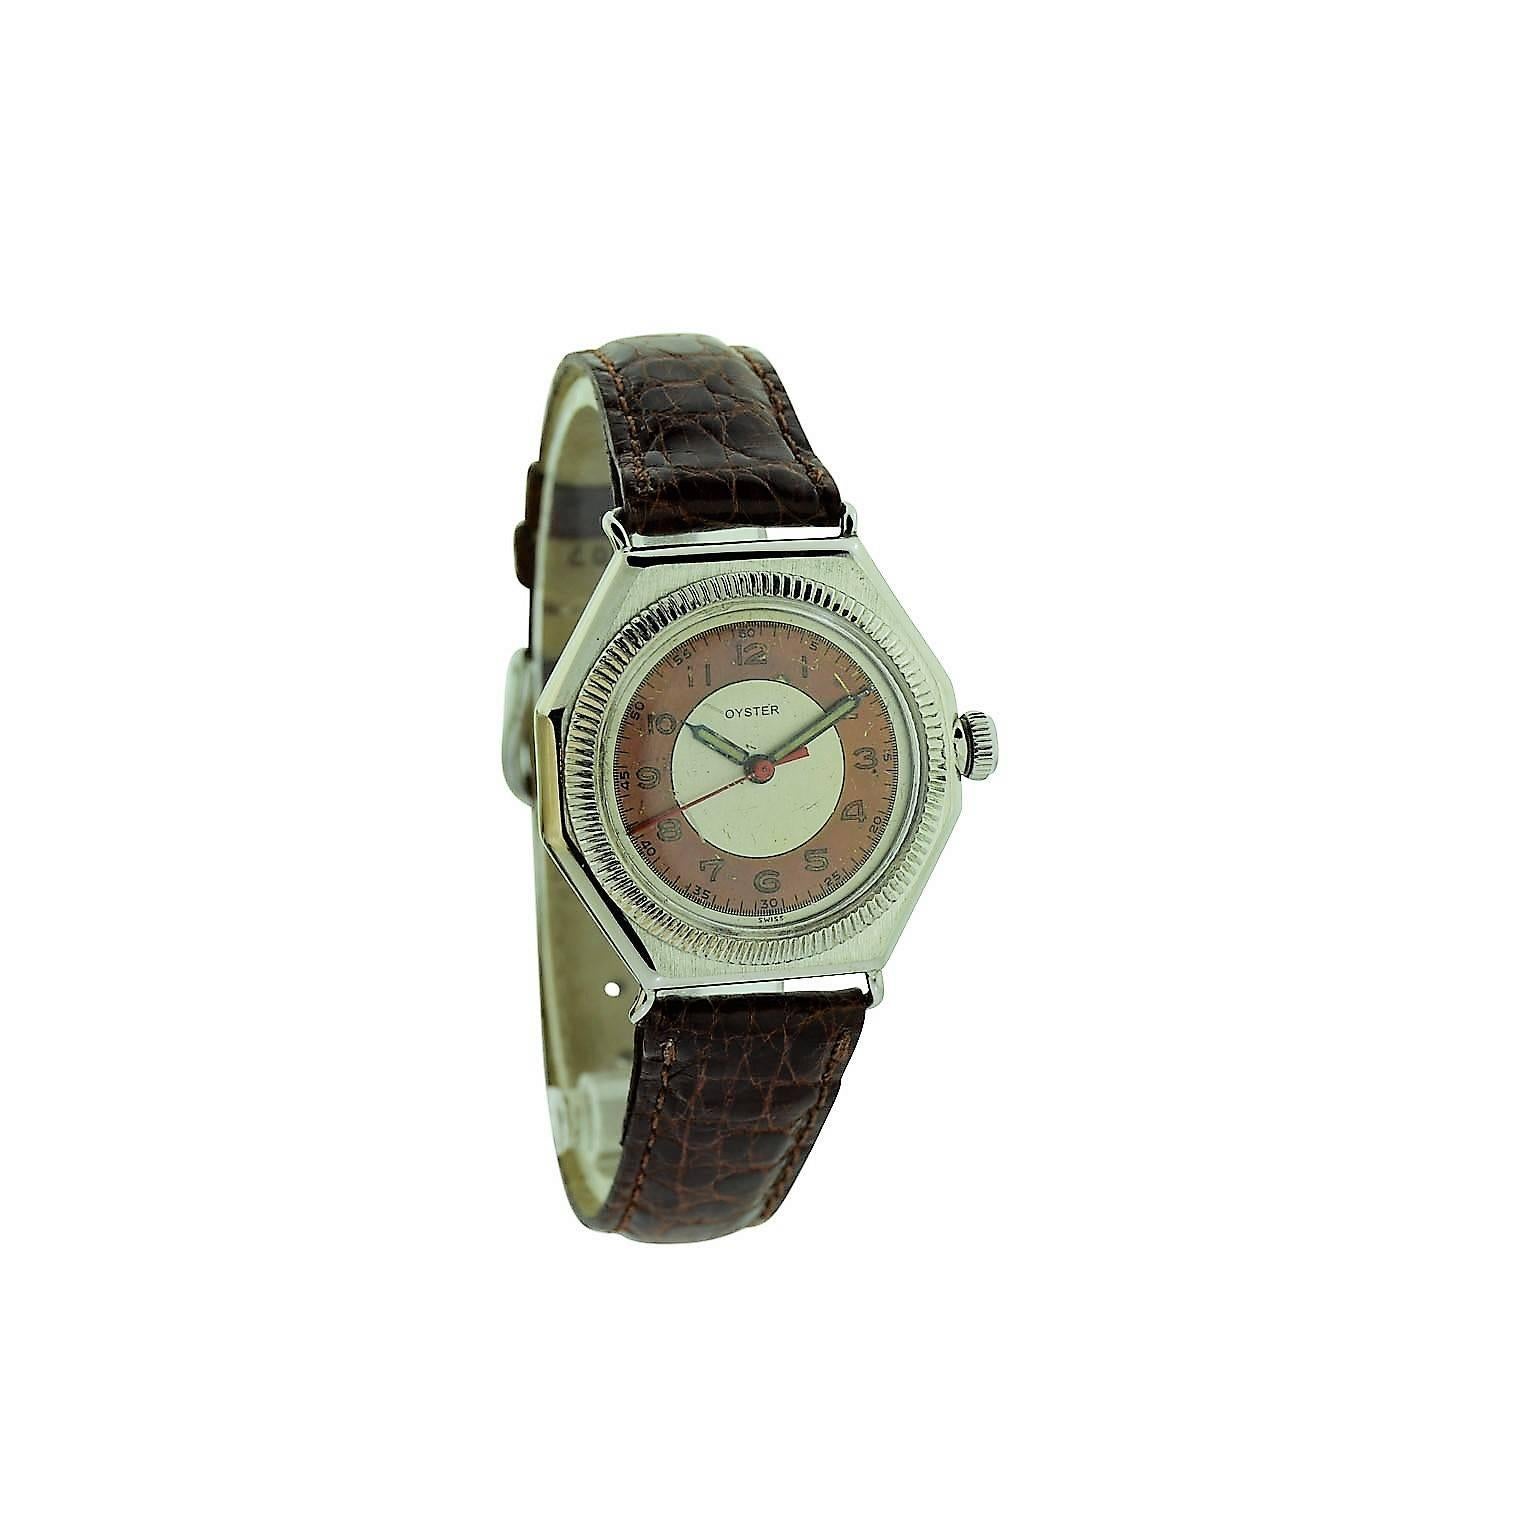 FACTORY / HOUSE: Oyster Watch Company by Rolex
STYLE / REFERENCE: Octagon 
METAL / MATERIAL: Stainless Steel
DIMENSIONS:  39  mm X 32 mm
CIRCA: 1943 / 1944 
MOVEMENT / CALIBER:  Manual Winding / 17 Jewels / Font Caliber
DIAL / HANDS: Two Tone Pink